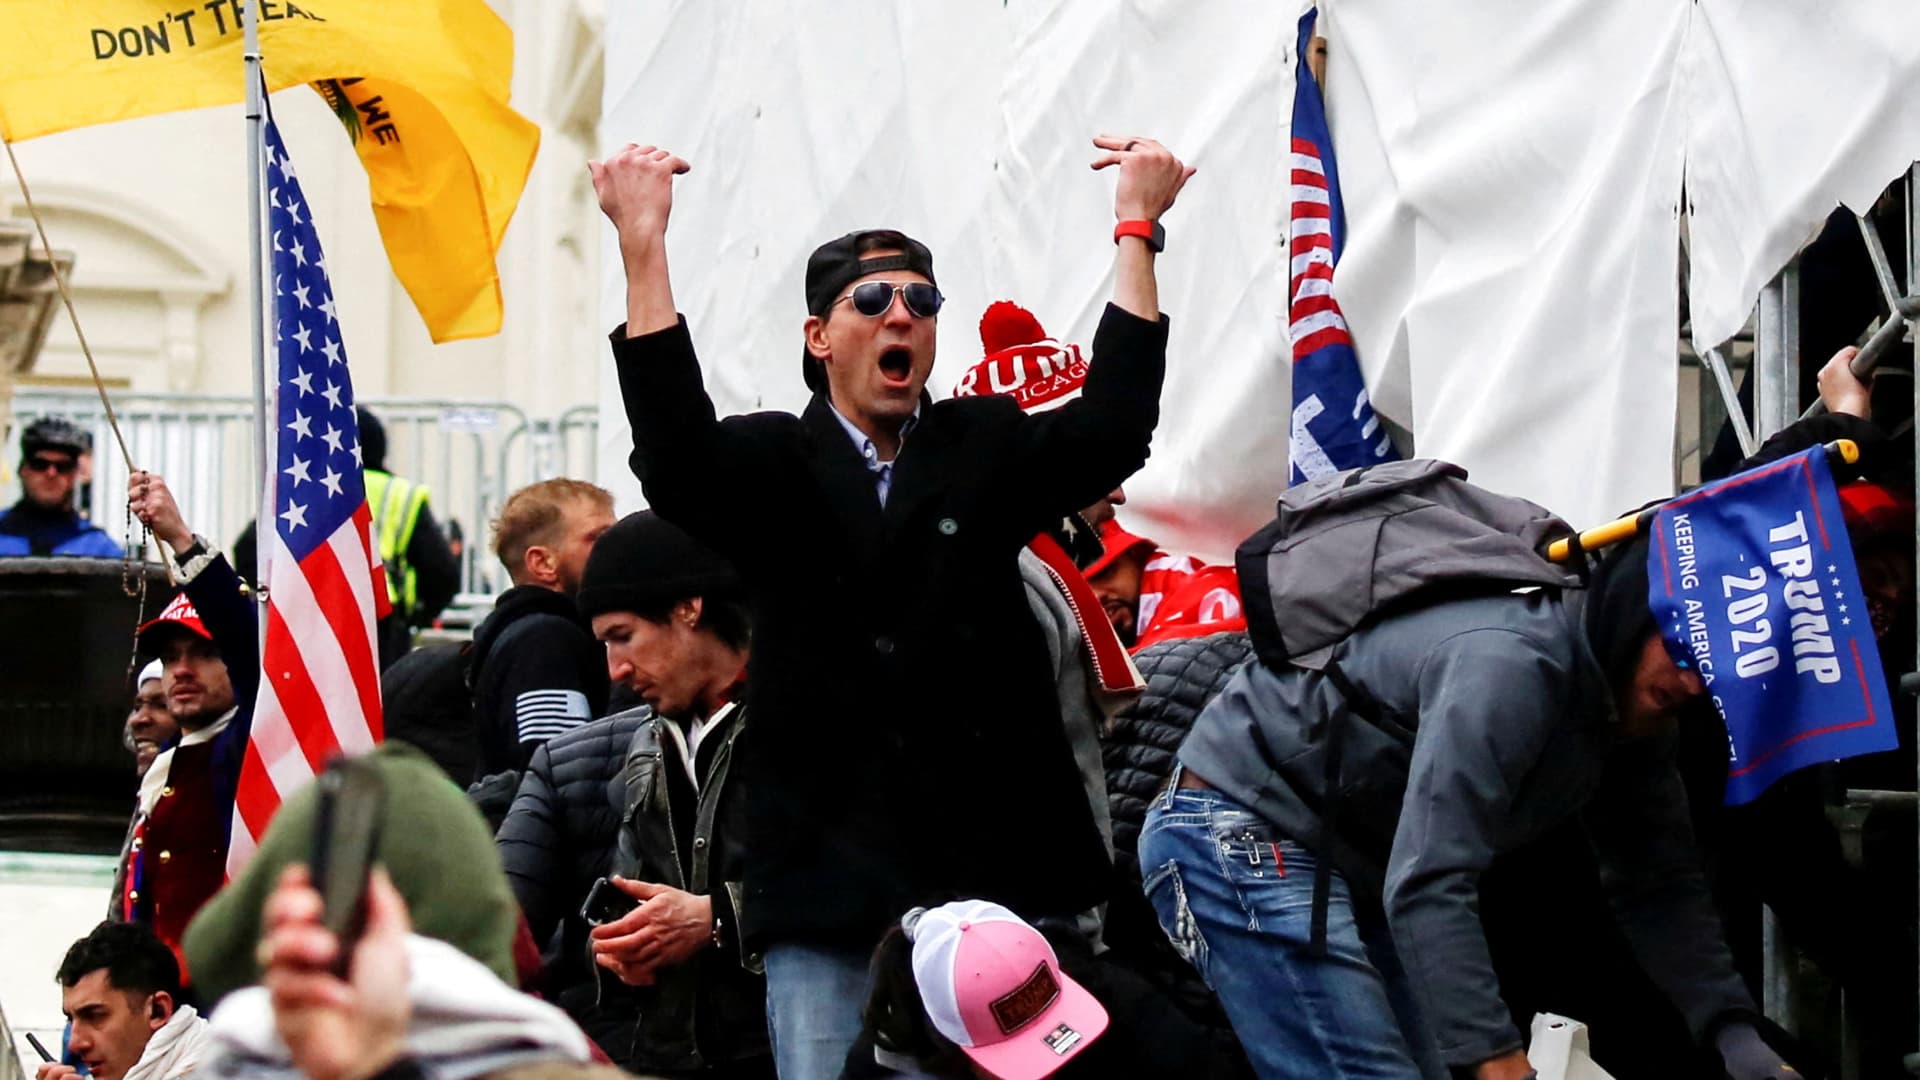 A man, identified as Ryan Kelley in a sworn statement by an FBI agent, gestures as supporters of U.S. President Donald Trump make their way past barriers at the U.S. Capitol during a protest against the certification of the 2020 U.S. presidential election results by the U.S. Congress, in Washington, U.S., January 6, 2021. 